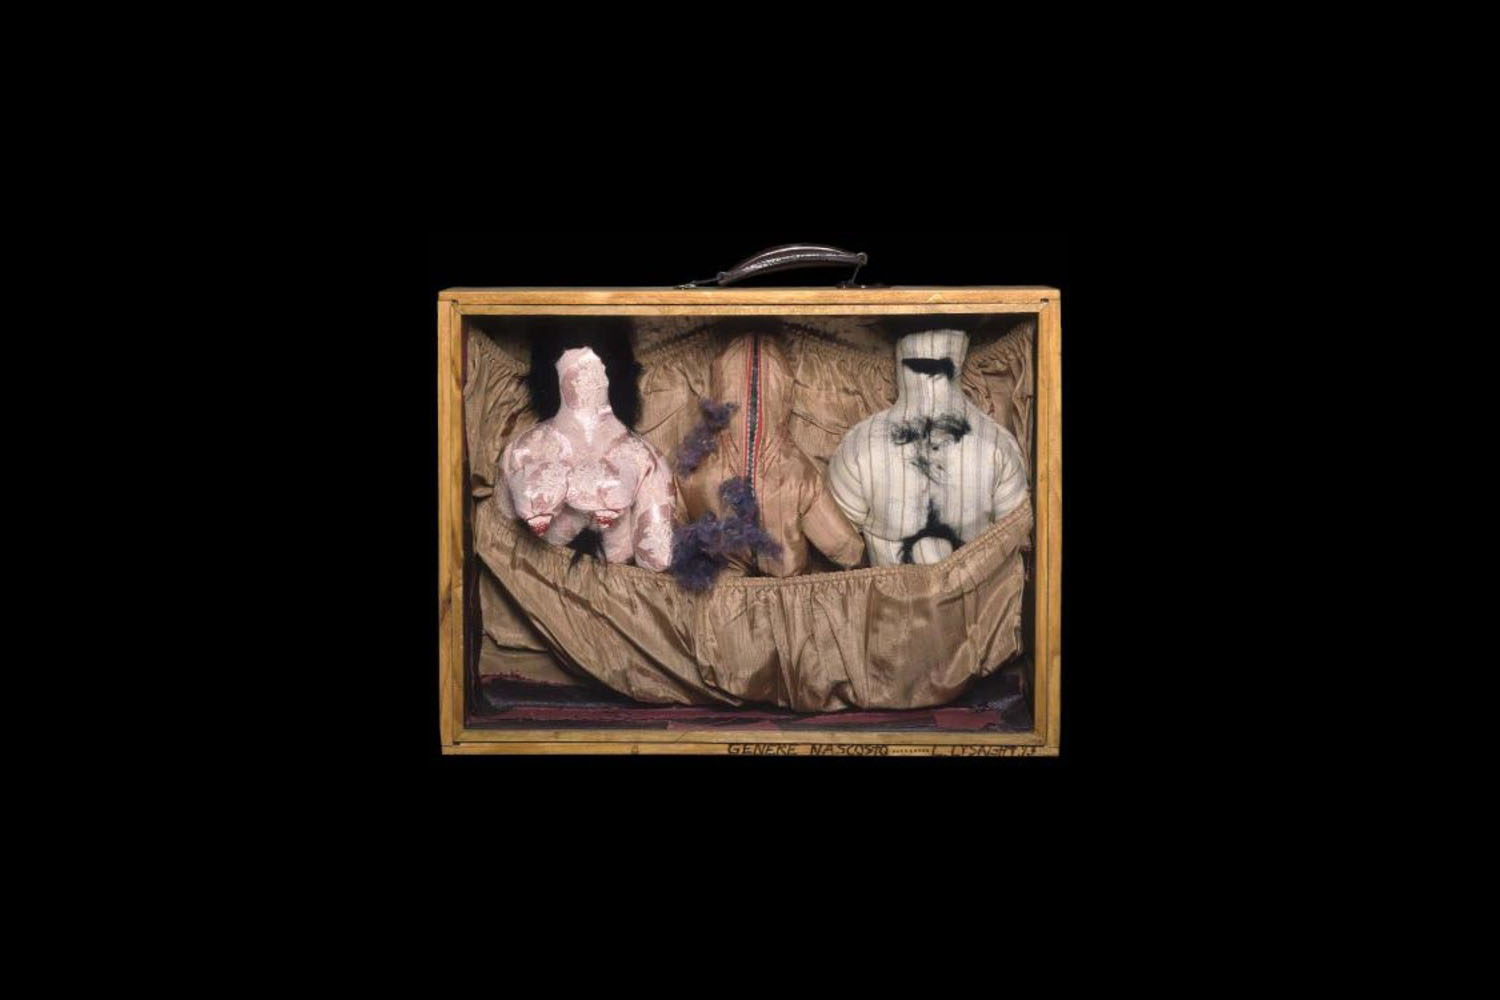 Wooden suitcase frame contains sewn naked male and female dolls